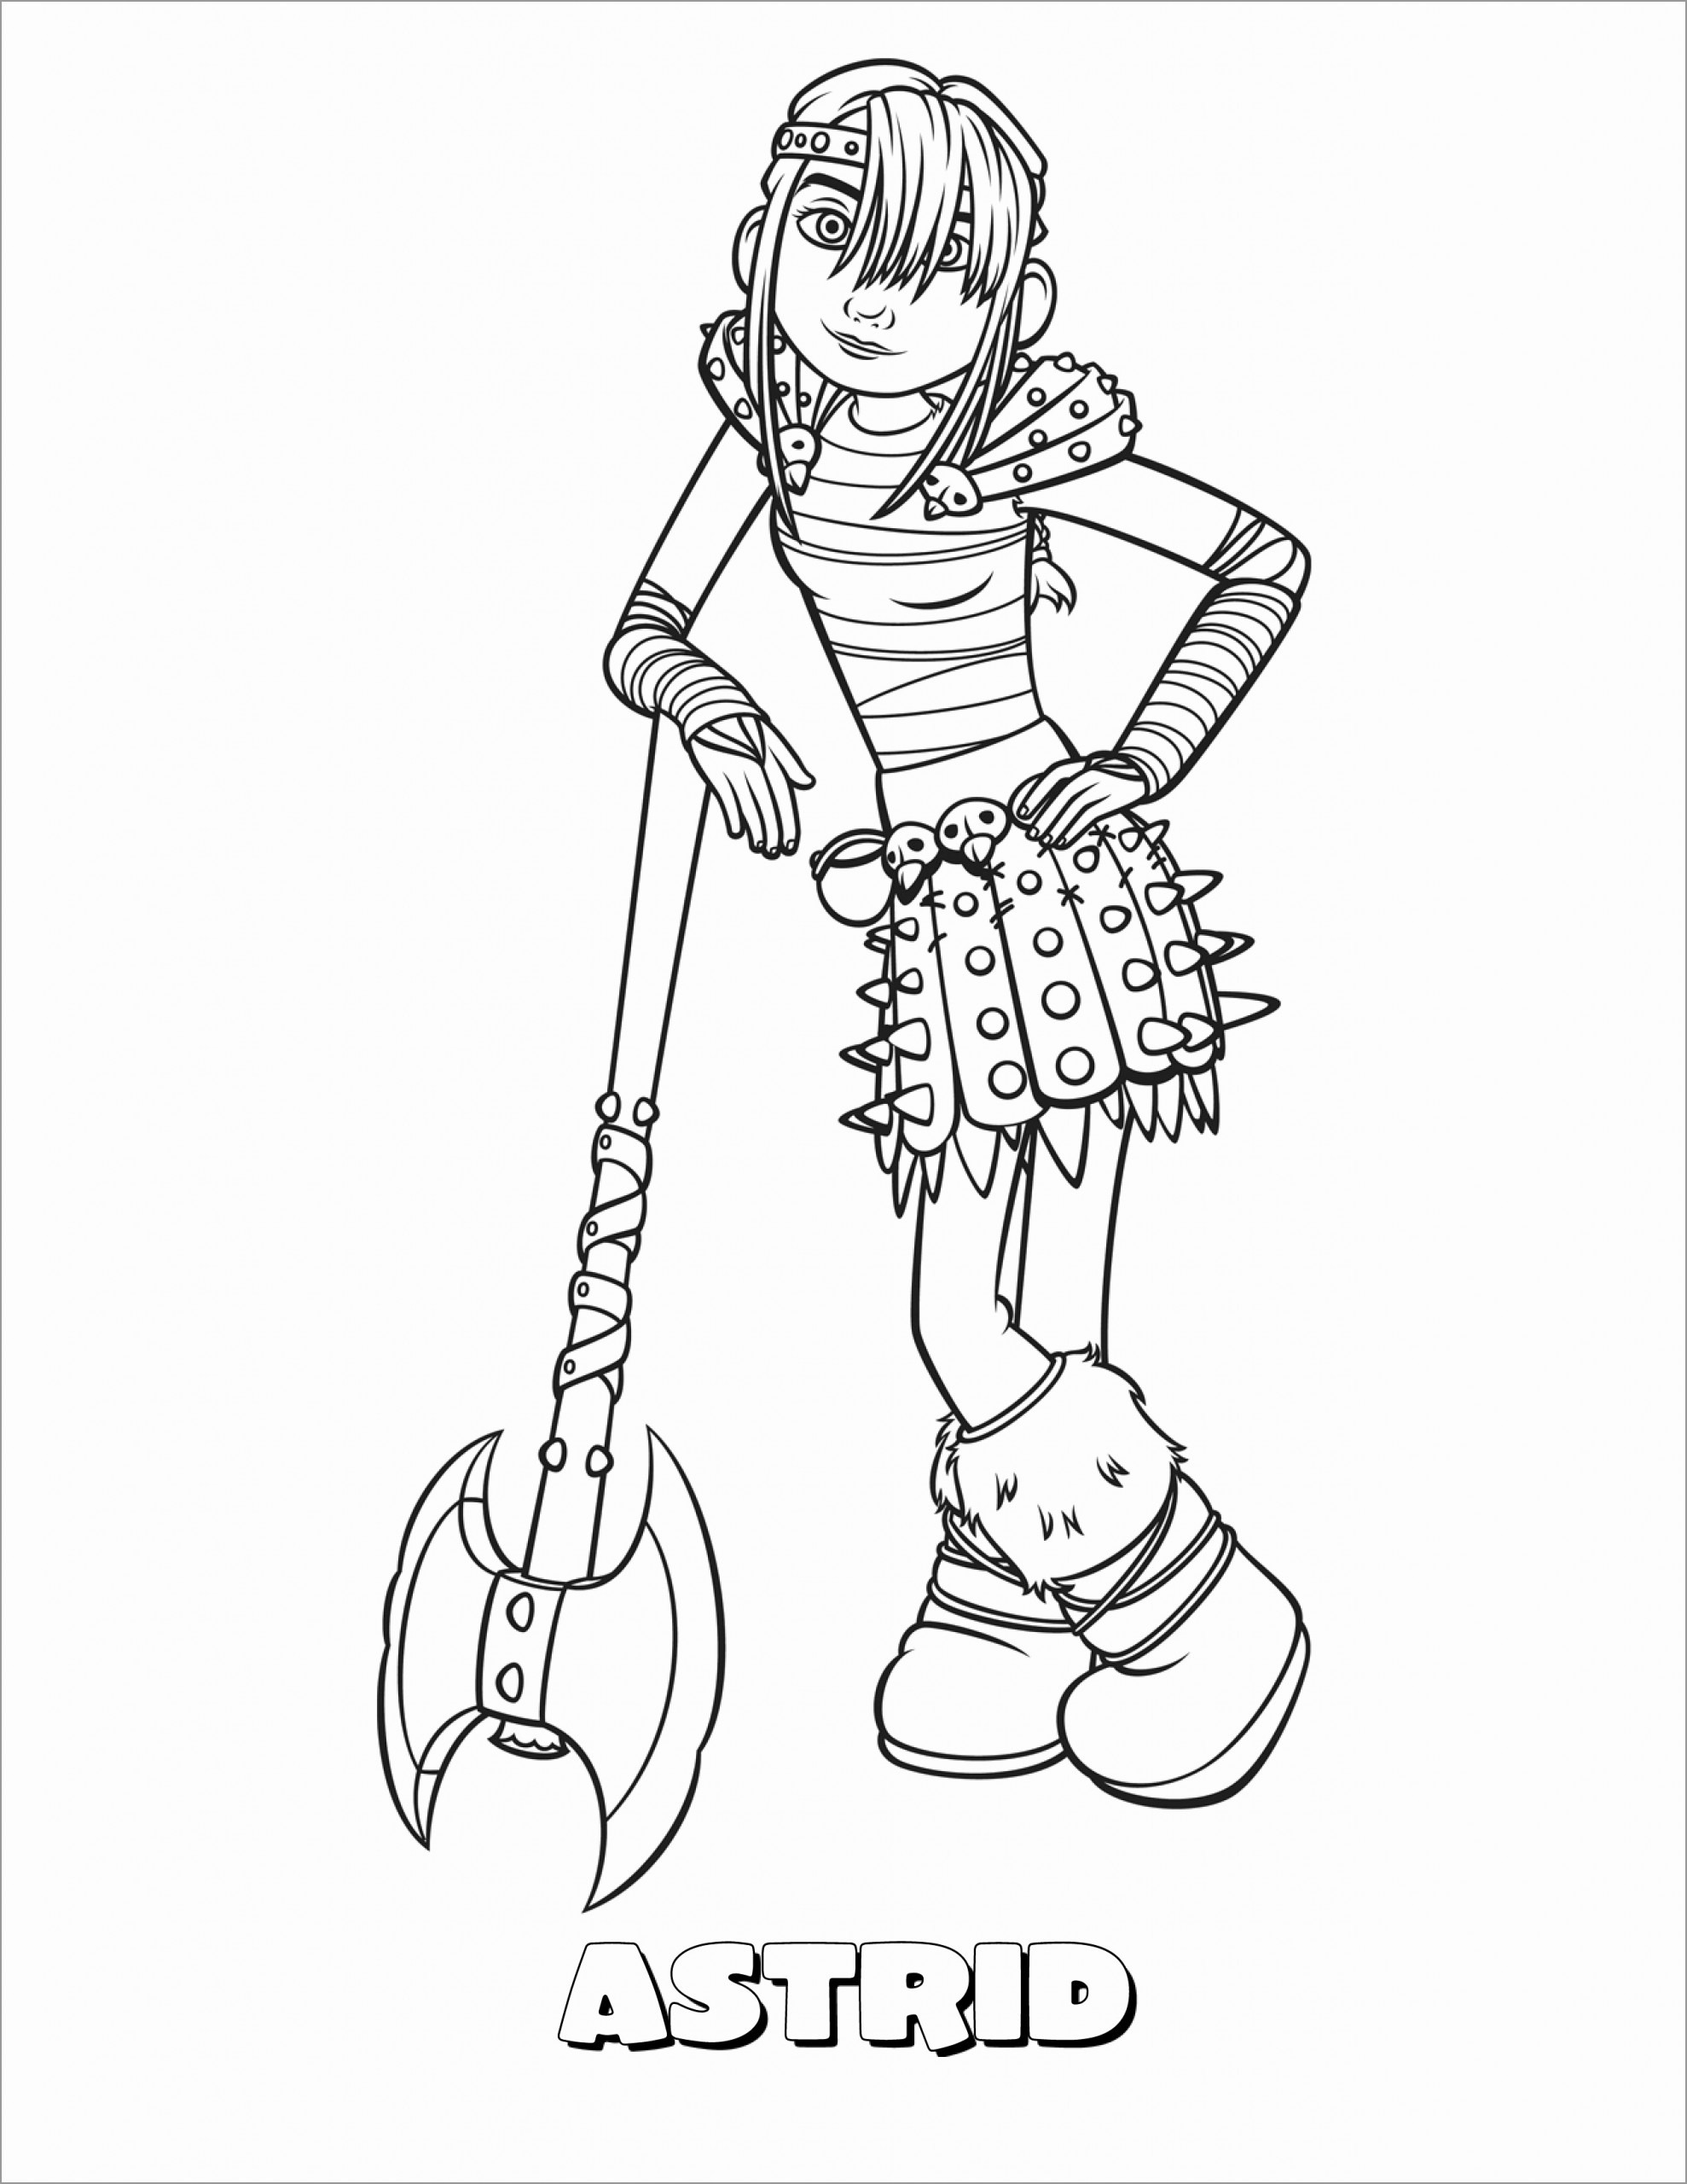 How to Train Your Dragon astrid Coloring Page Free Download